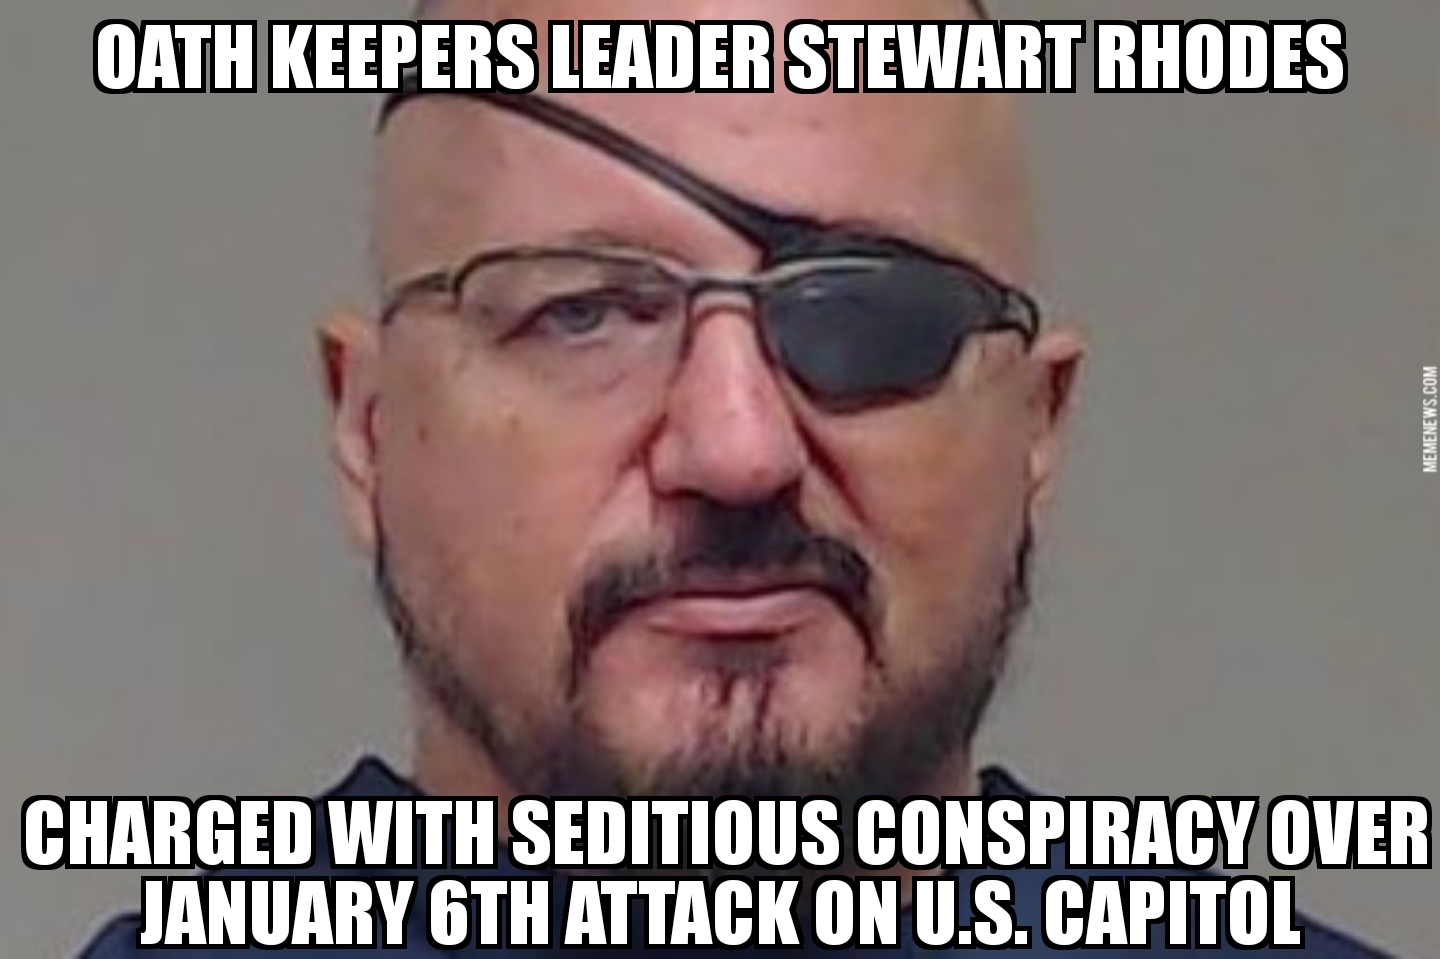 Oath Keepers leader charged over January 6th